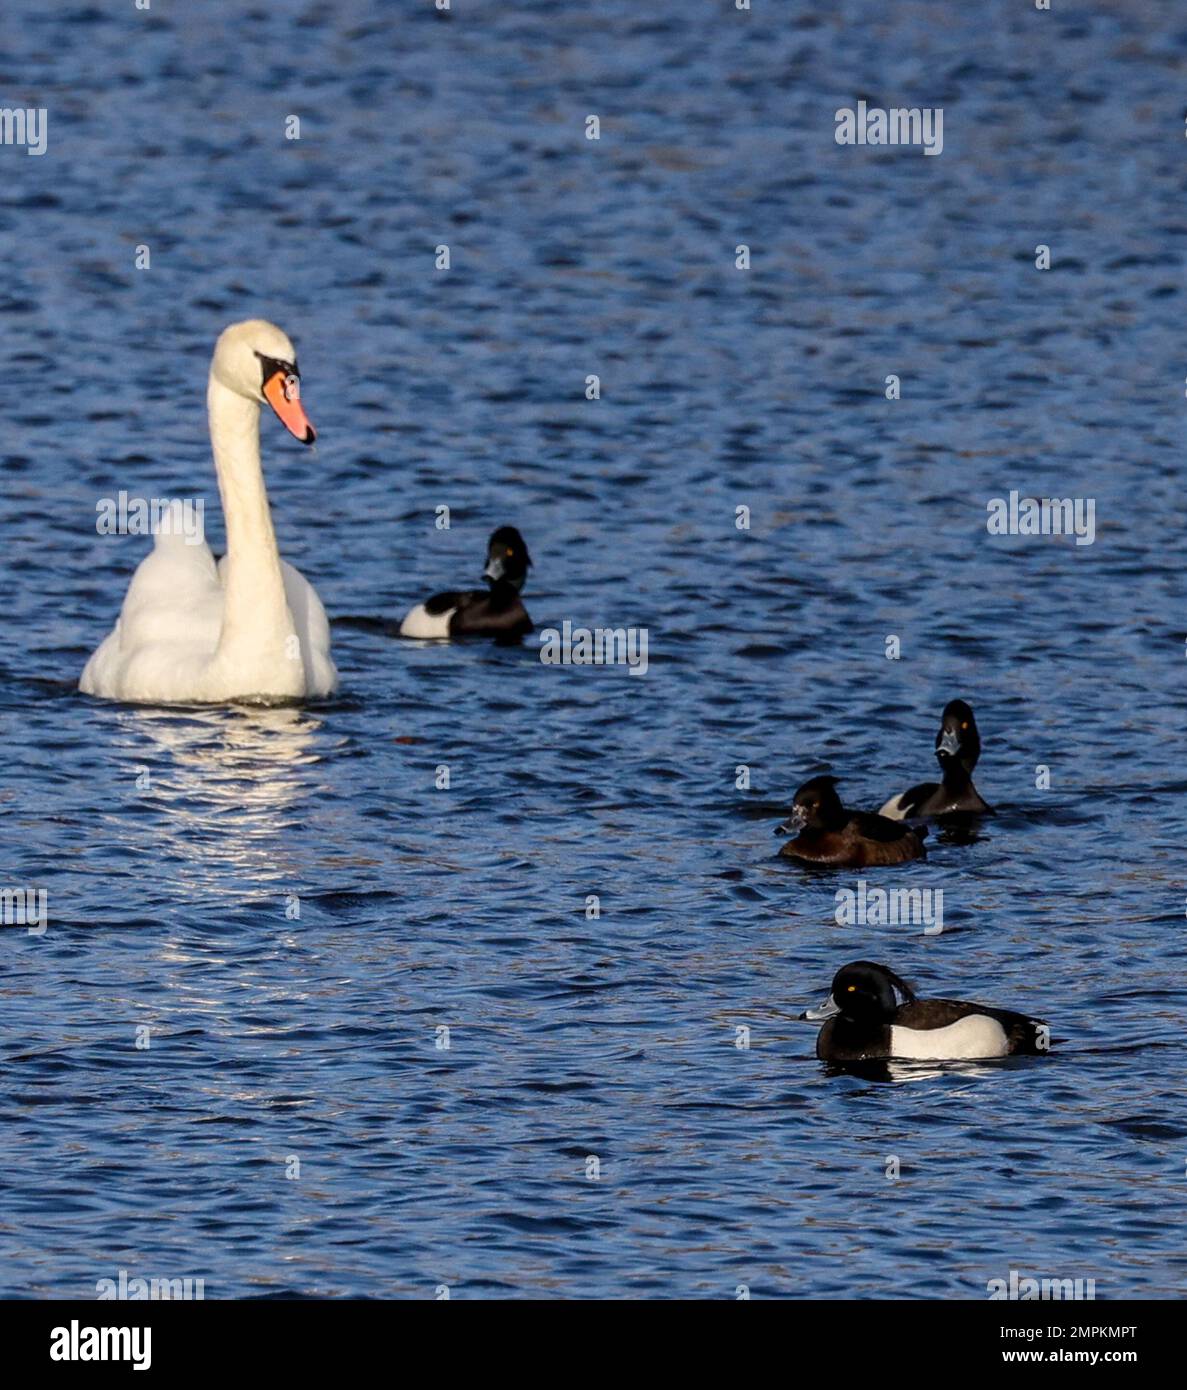 Kinnego, Lough Neagh, County Armagh, Northern Ireland, UK. 31 Jan 2023. UK weather – a mixed day of sunshine, rain, wind and showers before a wet and windy Wednesday.  Tufted ducks and a swan in the sunshine. Credit: CAZIMB/Alamy Live News. Stock Photo